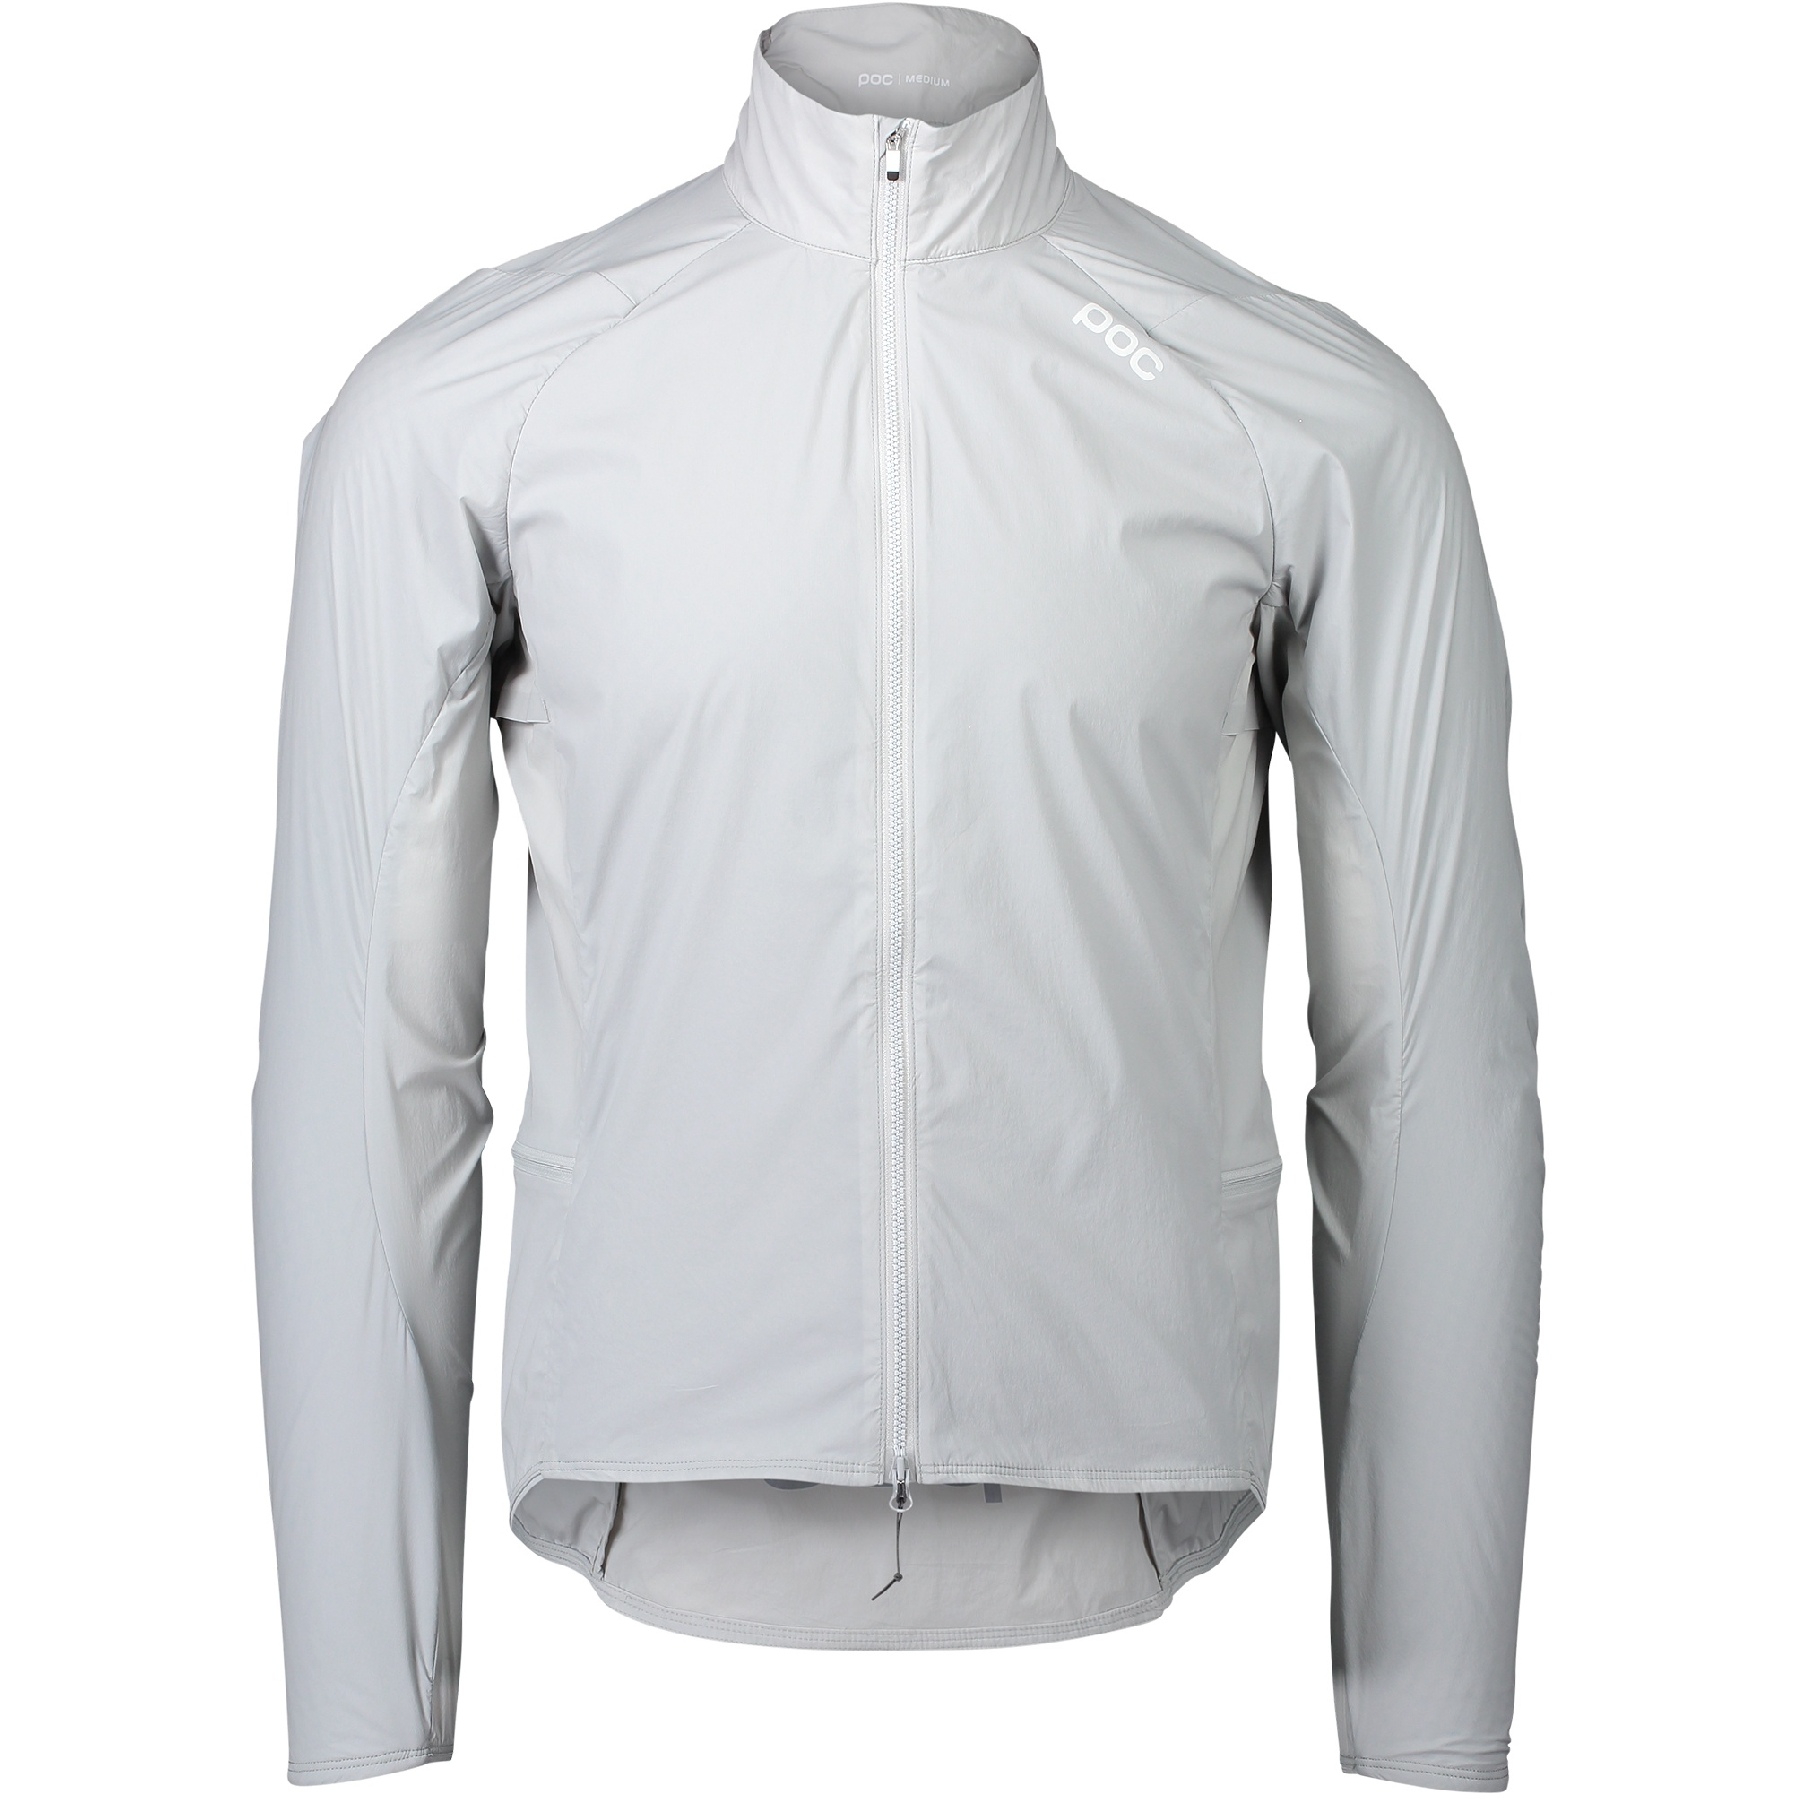 Picture of POC Pro Thermal Jacket - 1042 Granite Grey